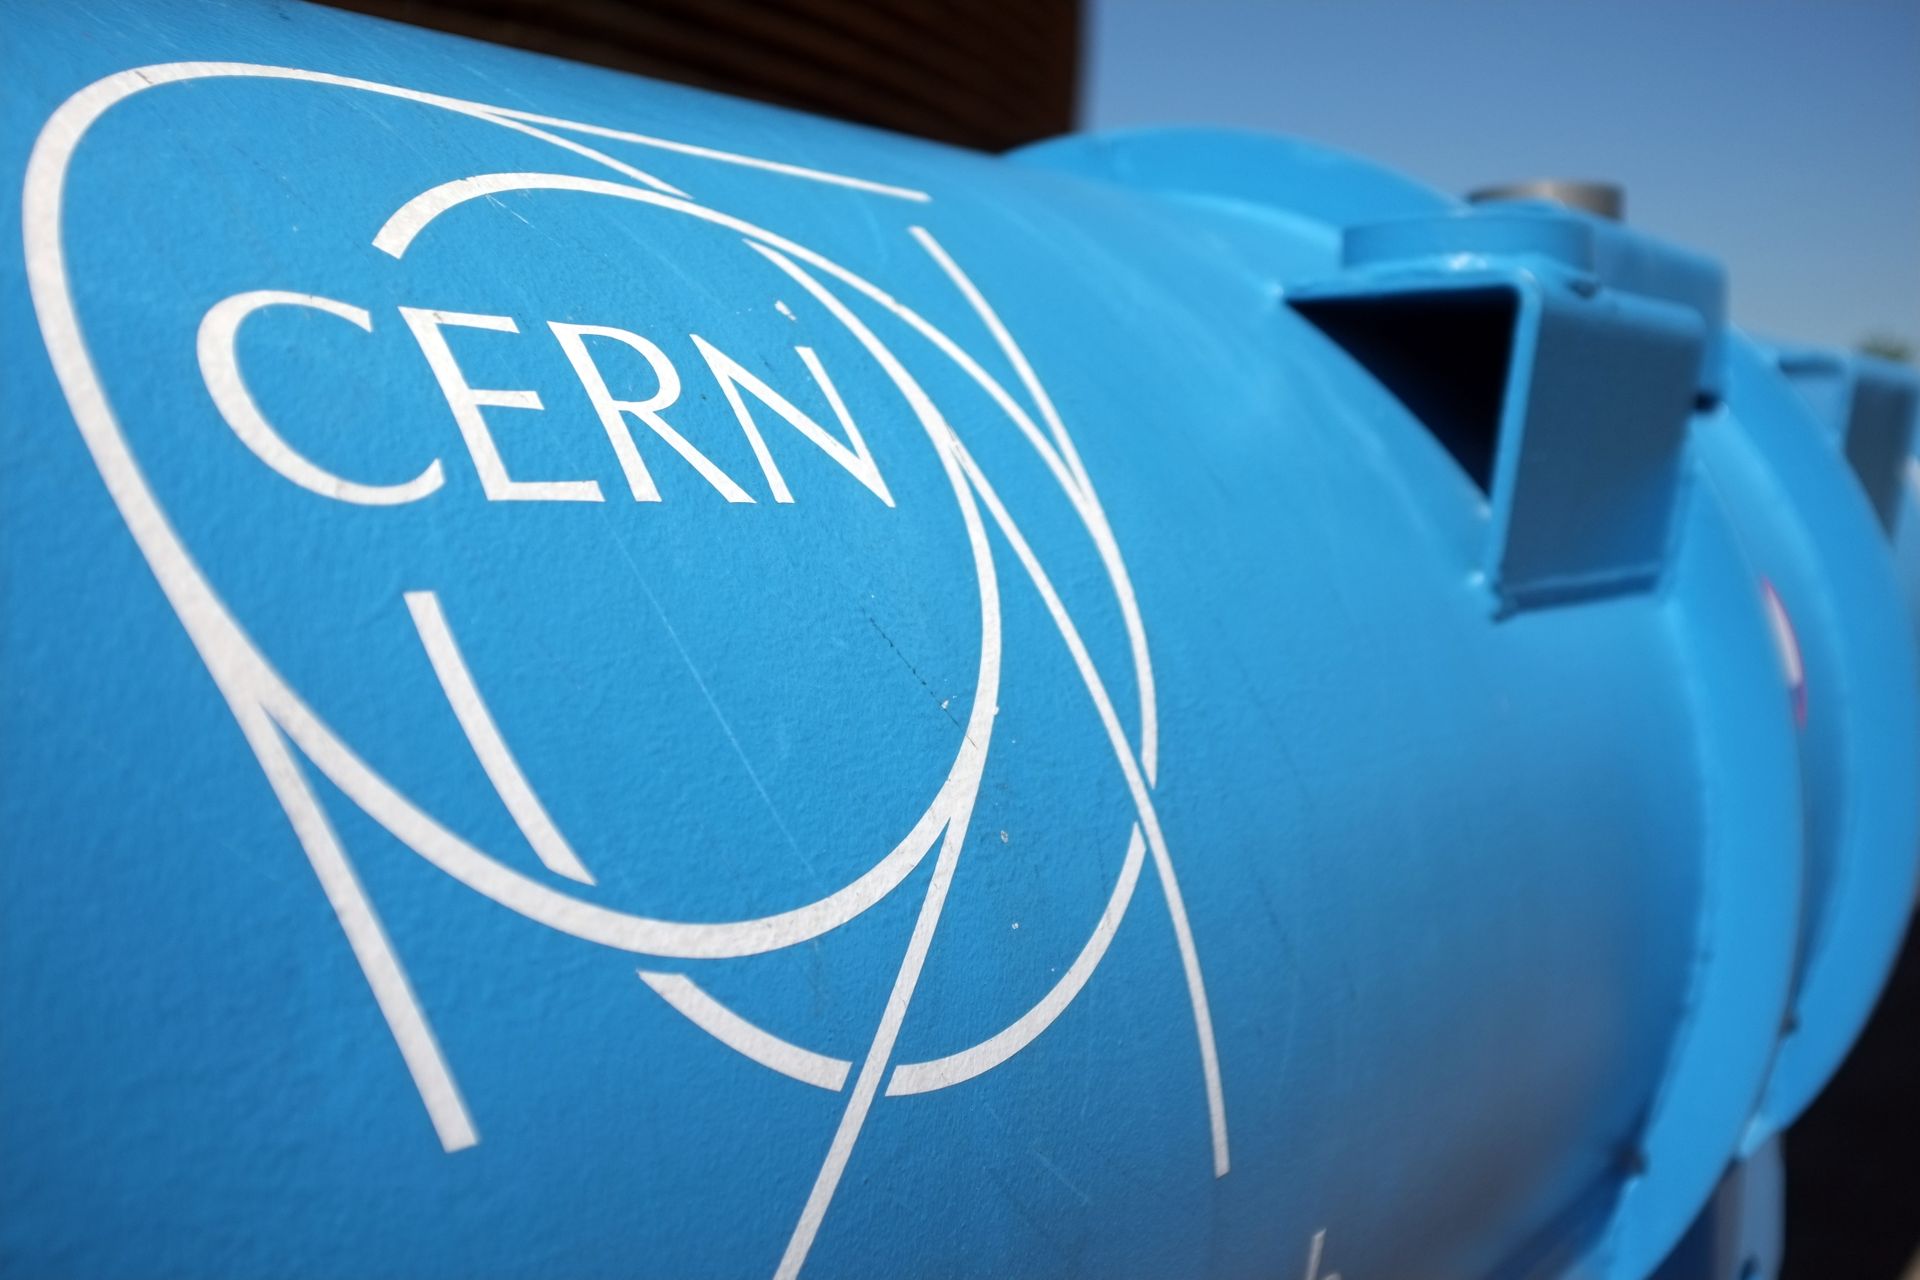 A tubular particle accelerator infrastructure with the CERN logo